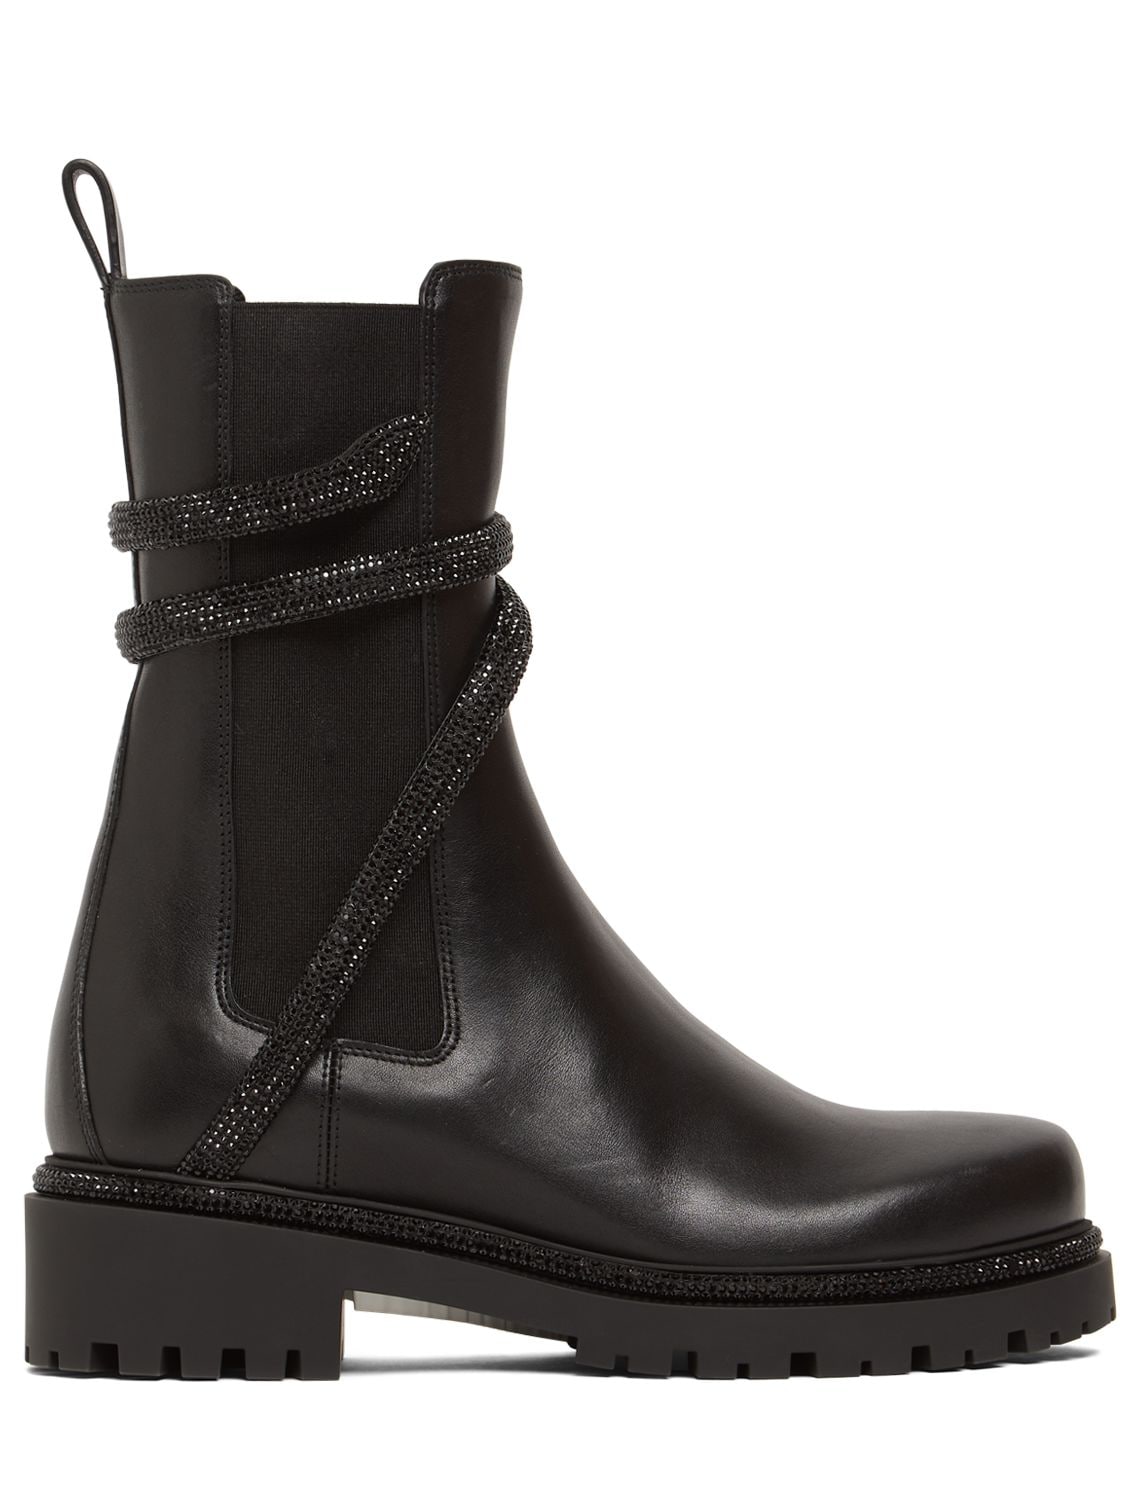 RENÉ CAOVILLA 40MM EMBELLISHED LEATHER CHELSEA BOOTS